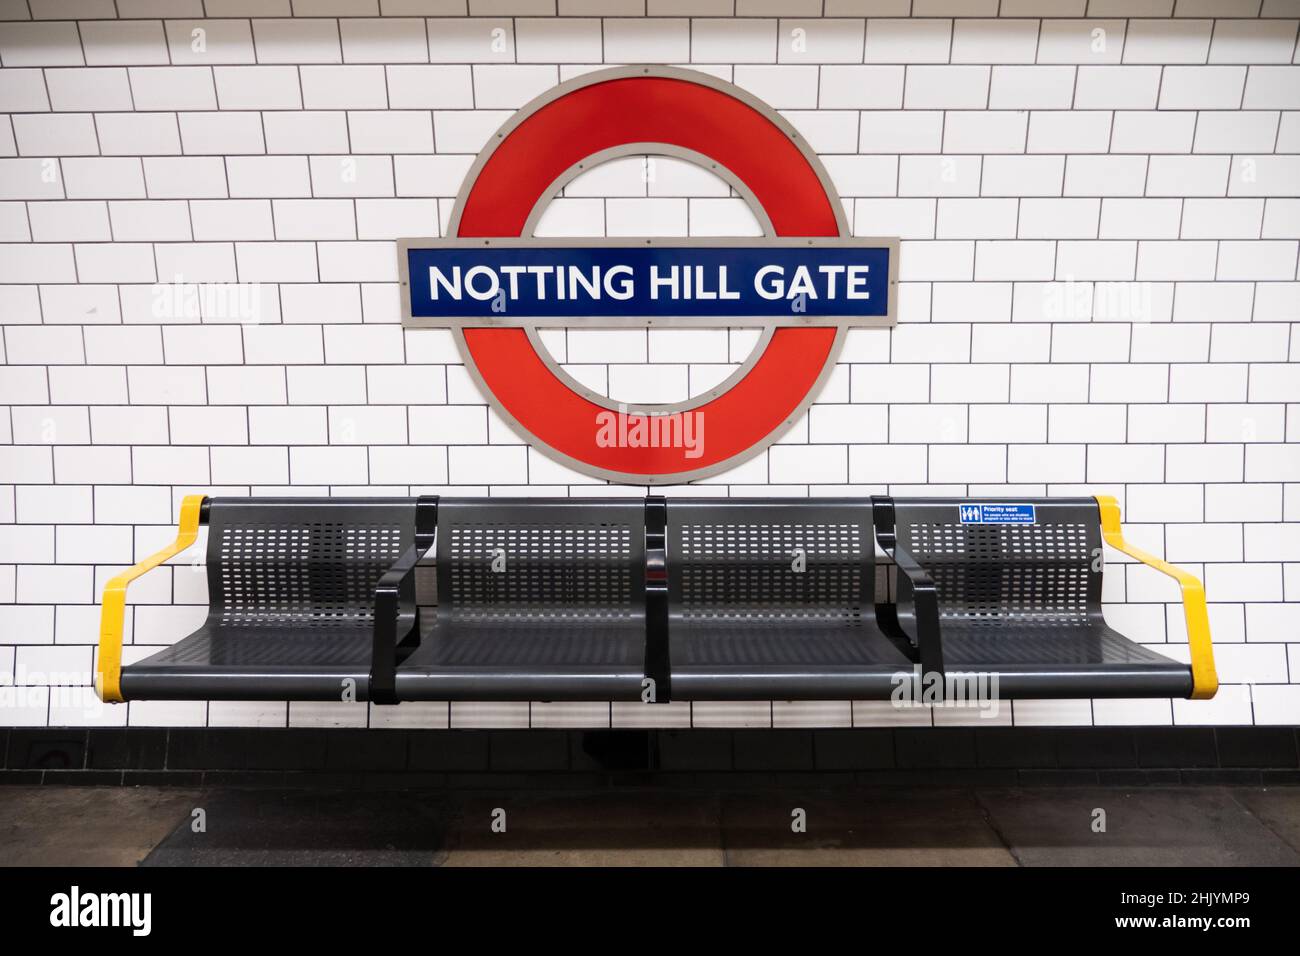 Notting Hill Gate tube station. The identifying roundel sign on the platform of a Central line London Underground public transport system station. Stock Photo